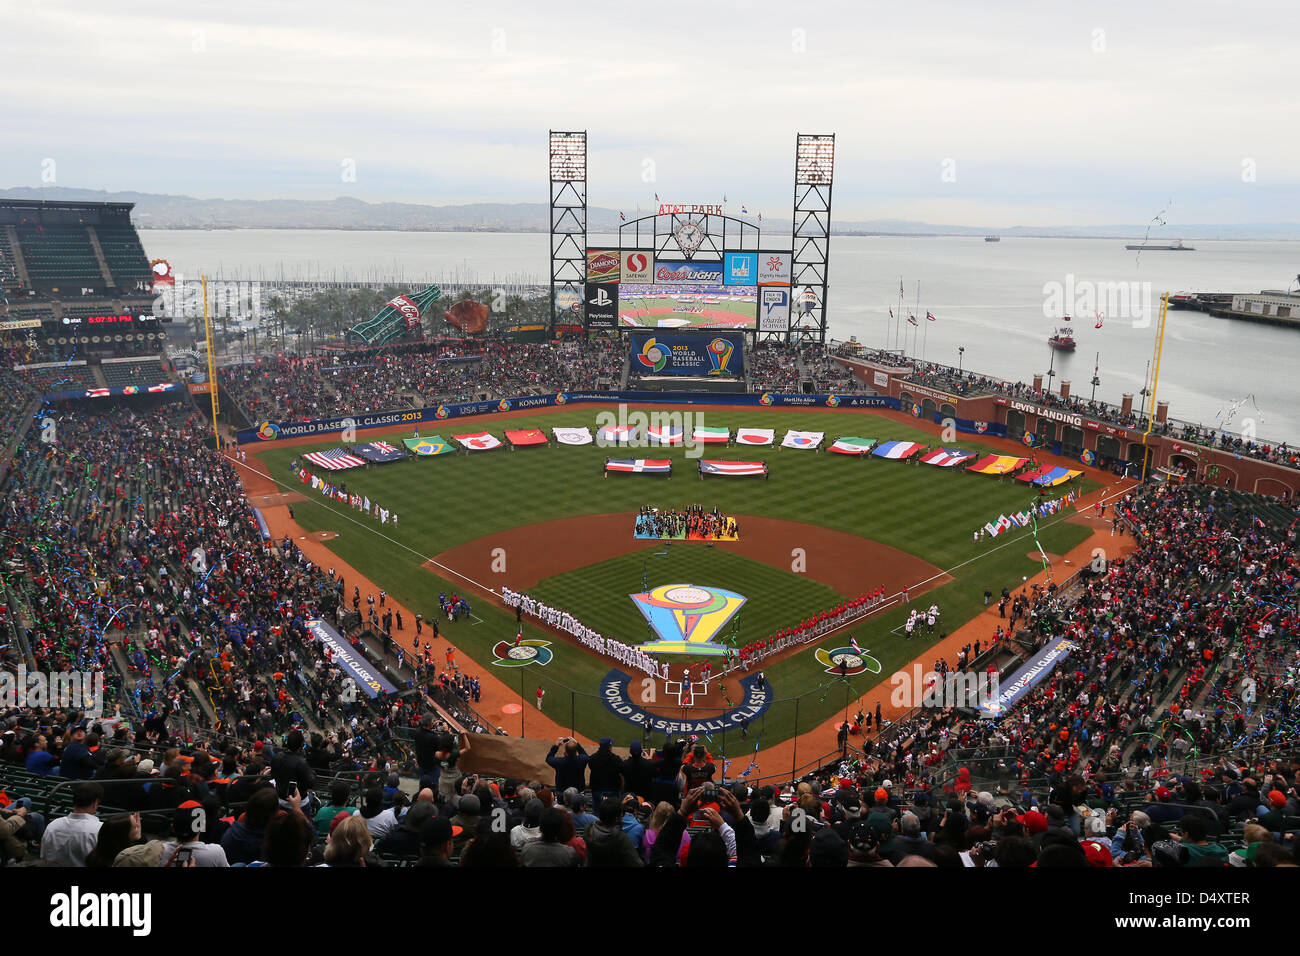 Genaral view,  MARCH 19, 2013 - WBC :  World Baseball Classic 2013  Championship Round  Final  between Puerto Rico 0-3 Dominican Republic  at AT&T Park in San Francisco, California, United States.  (Photo by AFLO) [1040] Stock Photo